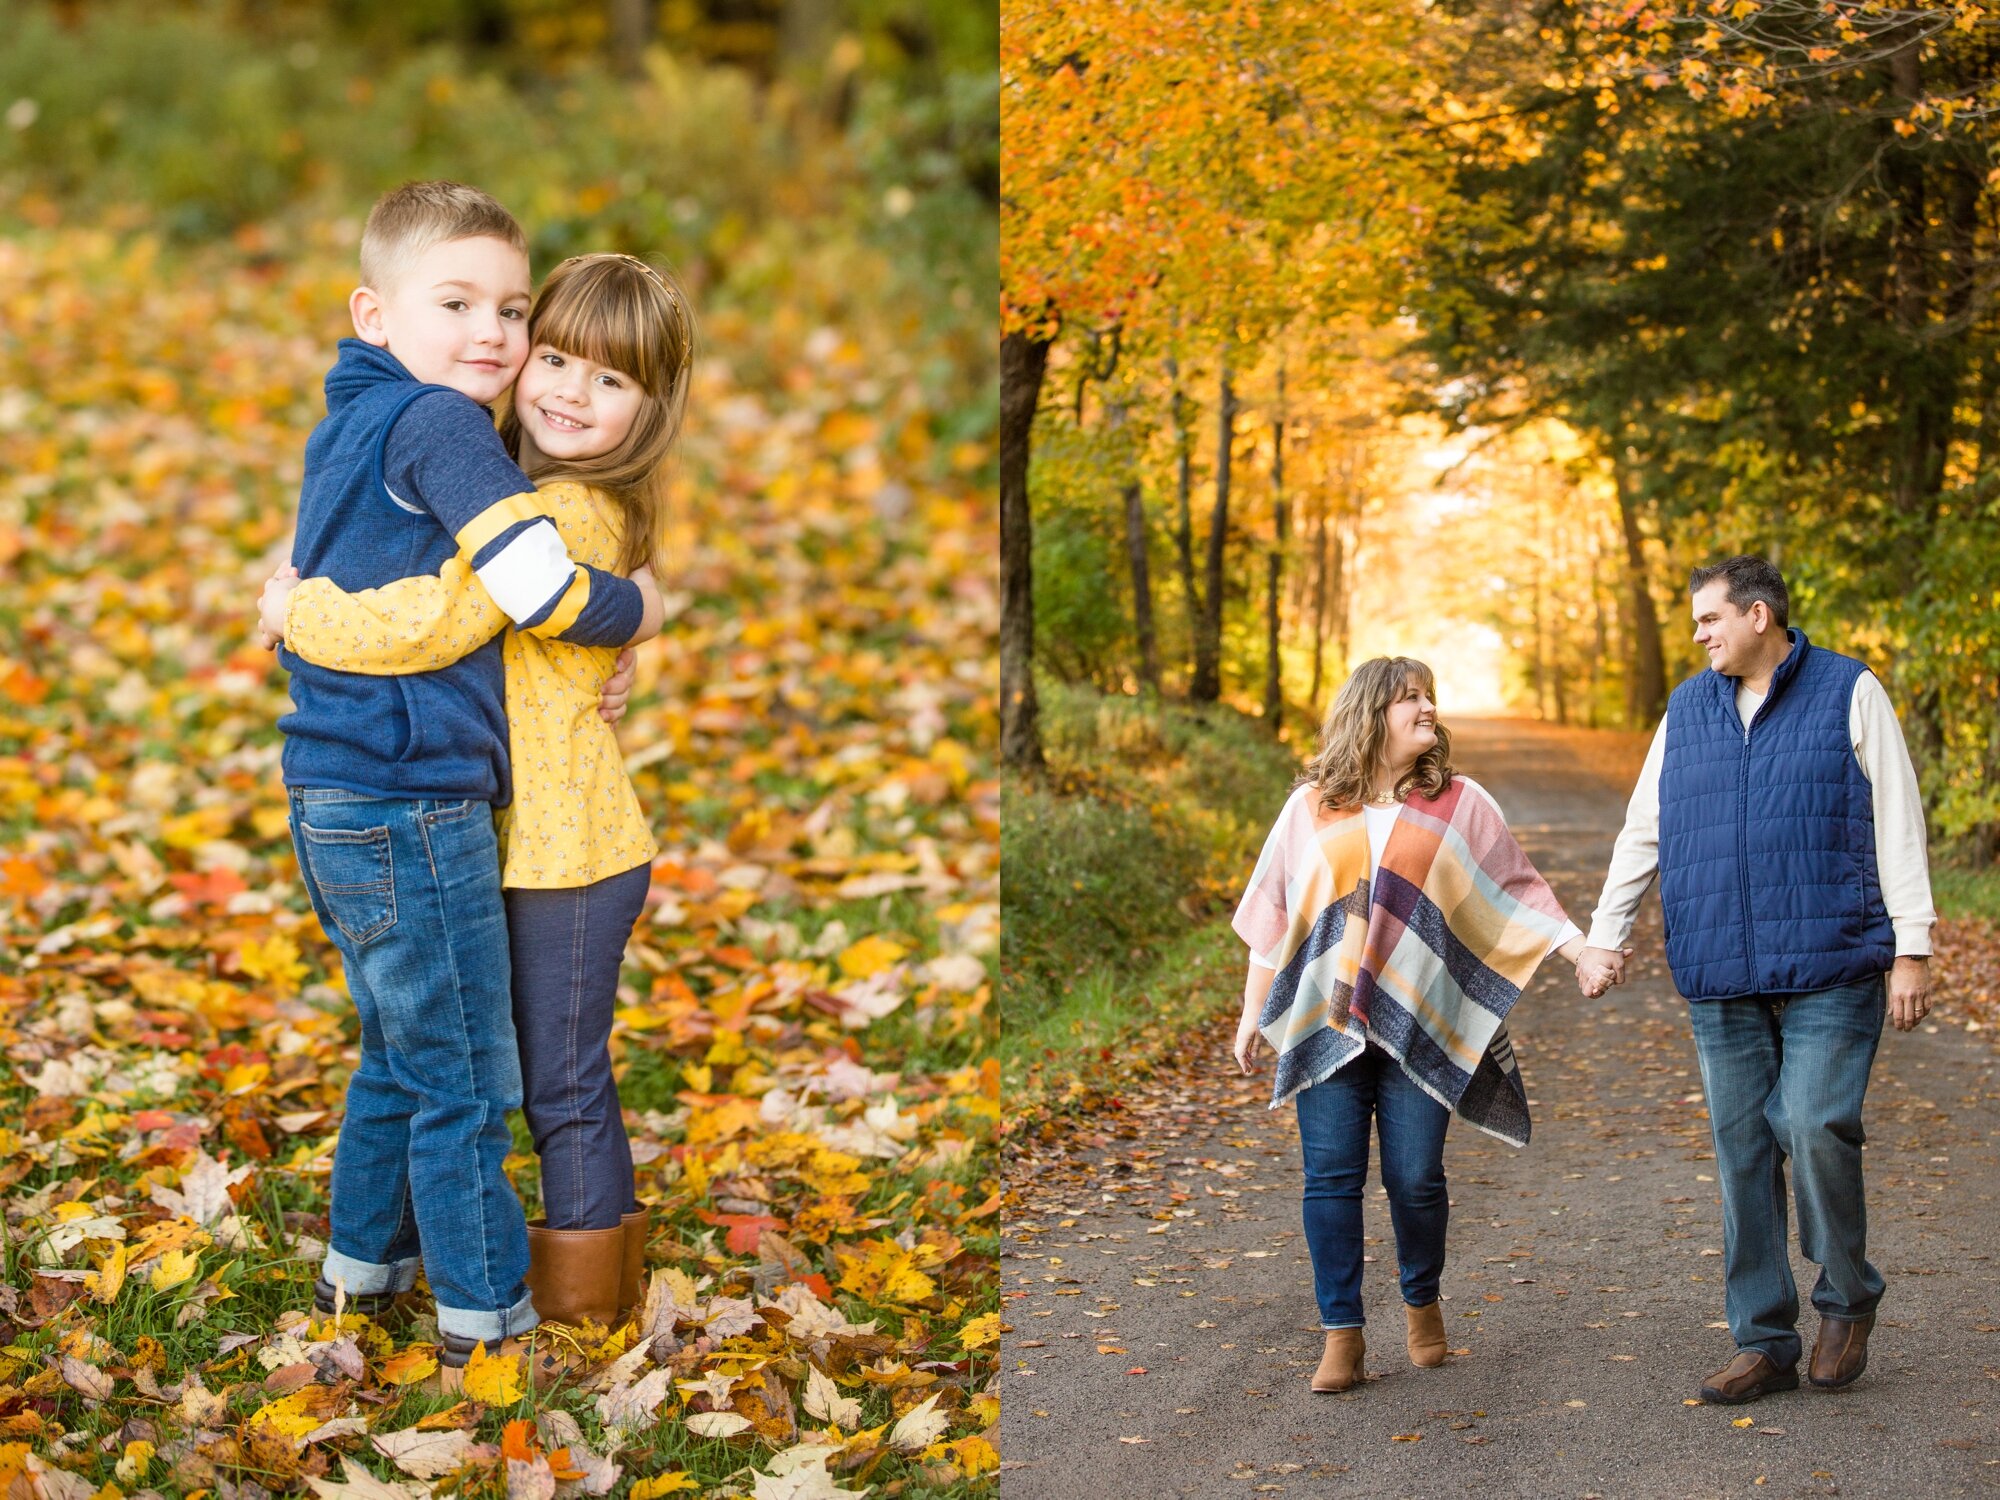 pittsburgh family photographer, mcconnells mill family photos, cranberry township family photographer, location ideas for photo shoot pittsburgh